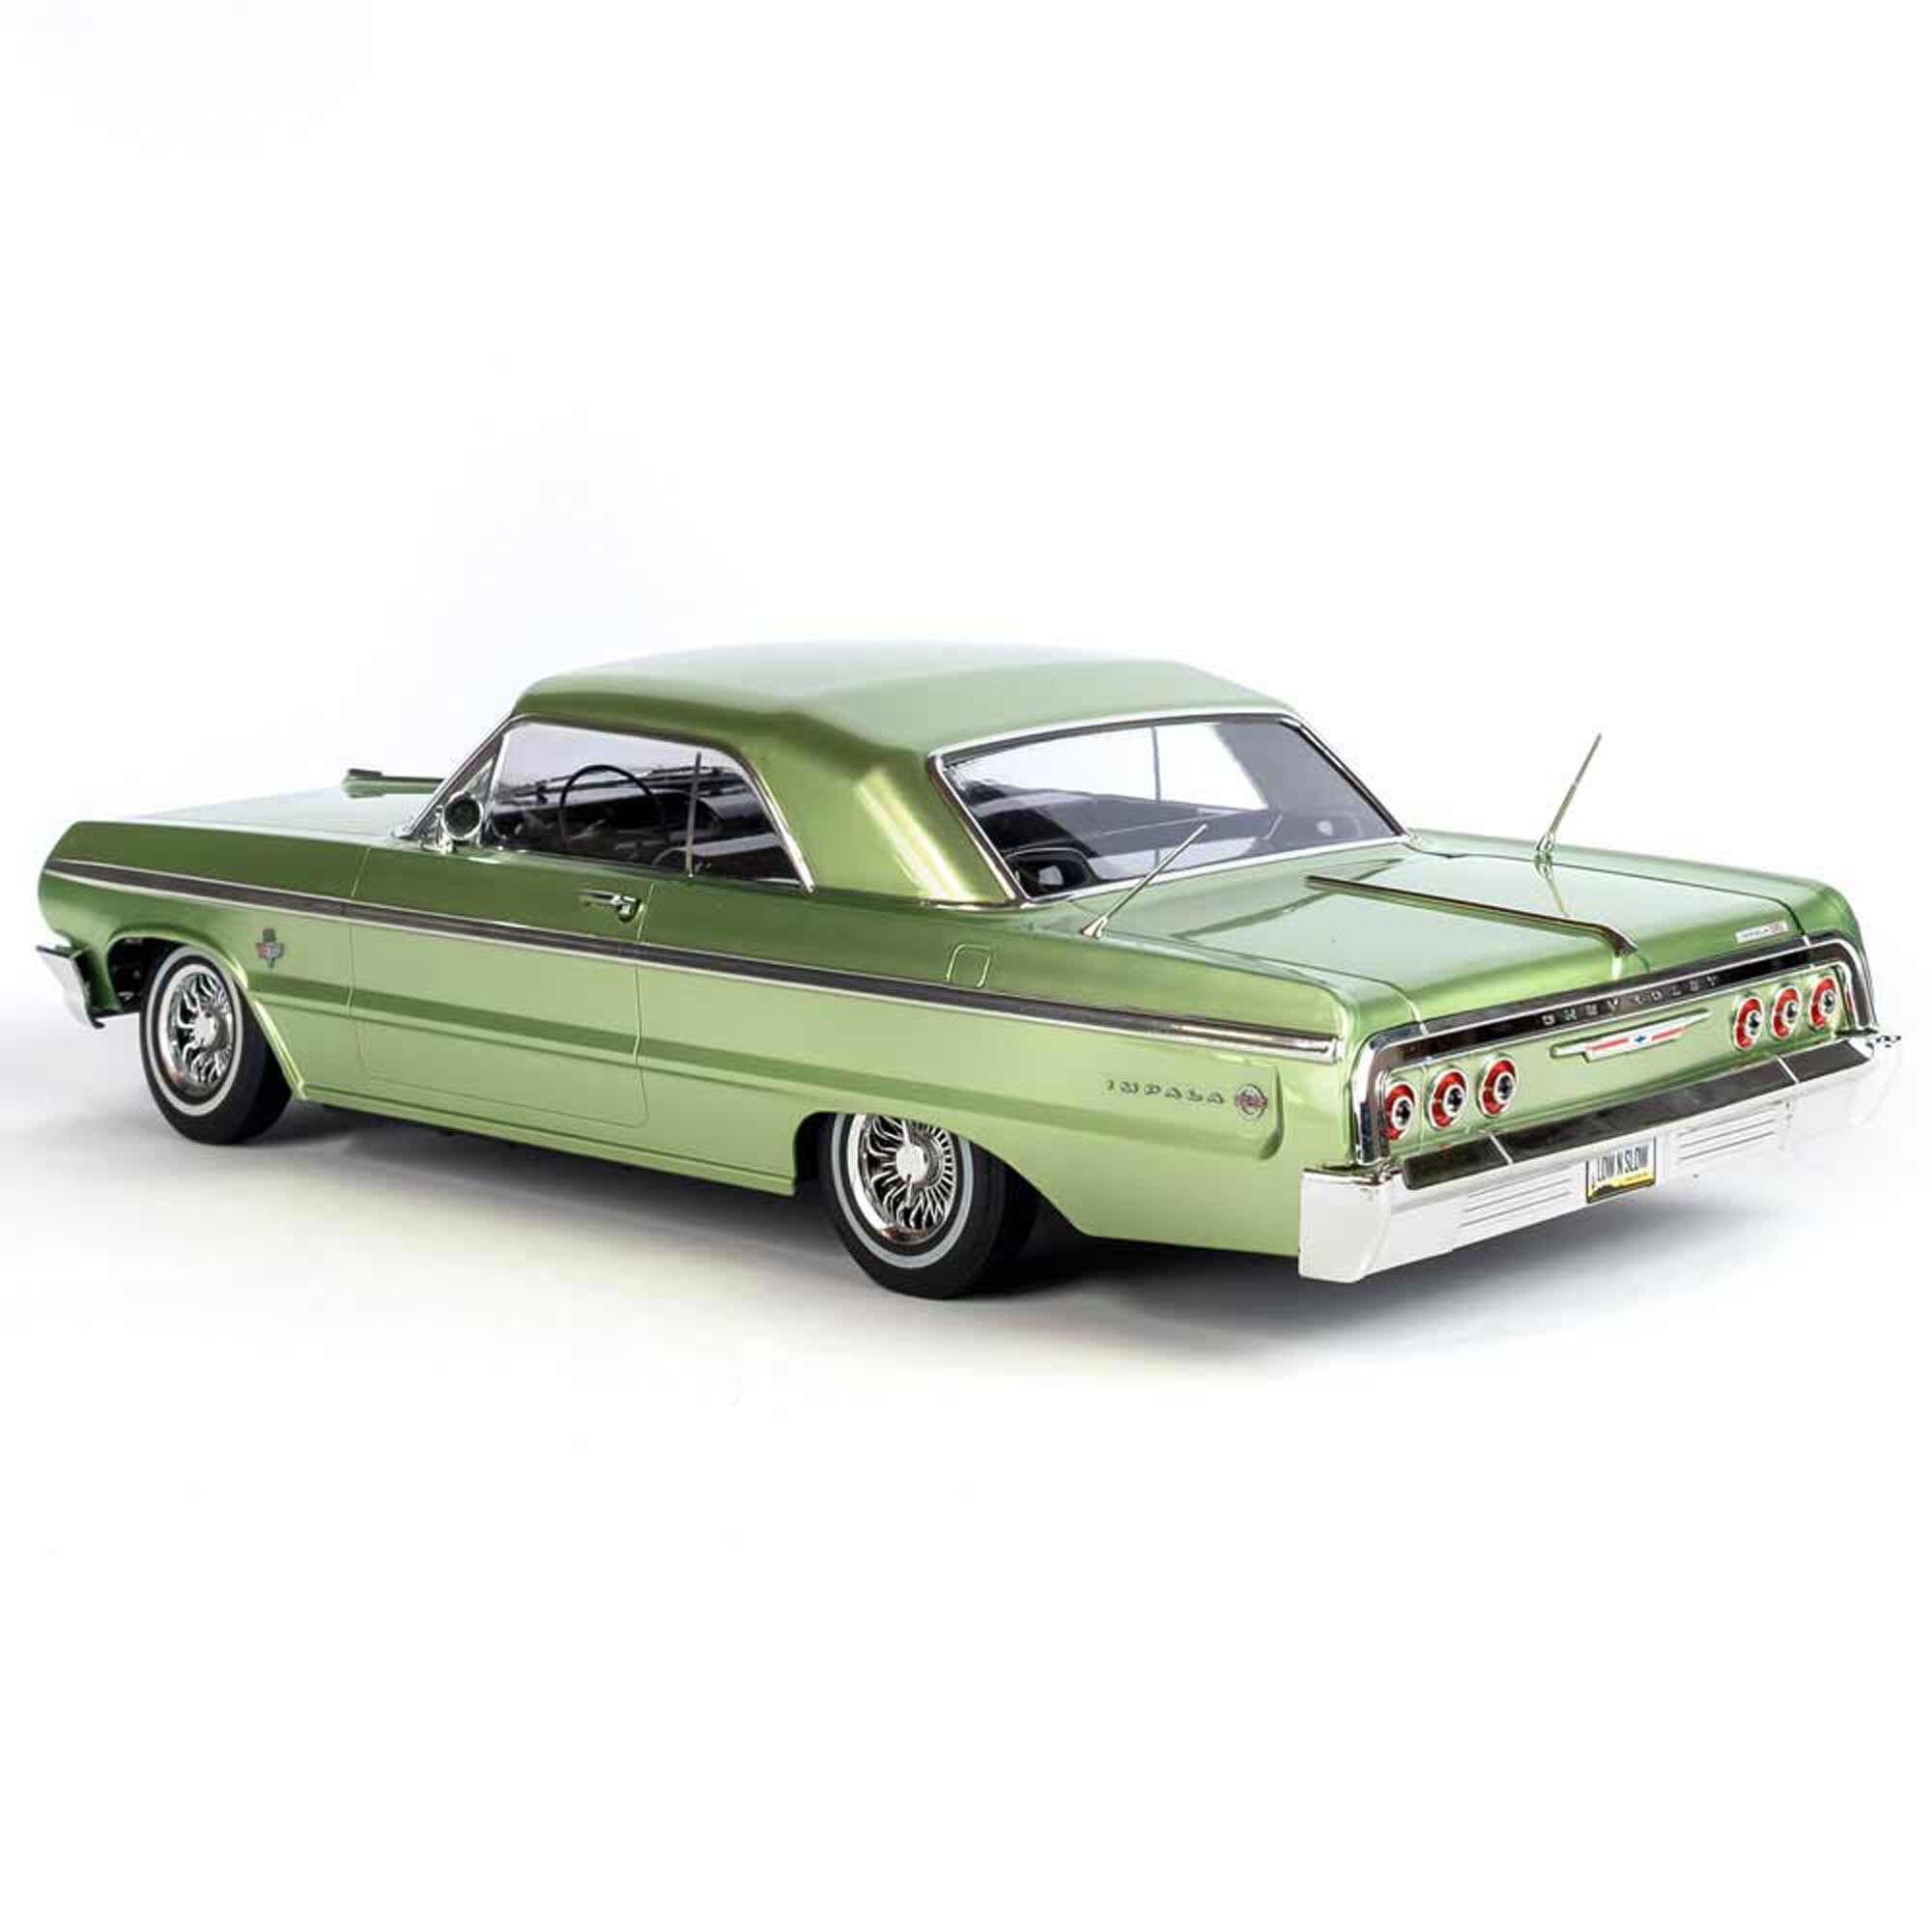 1/10 SixtyFour Chevrolet Impala Brushed 2WD Hopping Lowrider RTR, Green